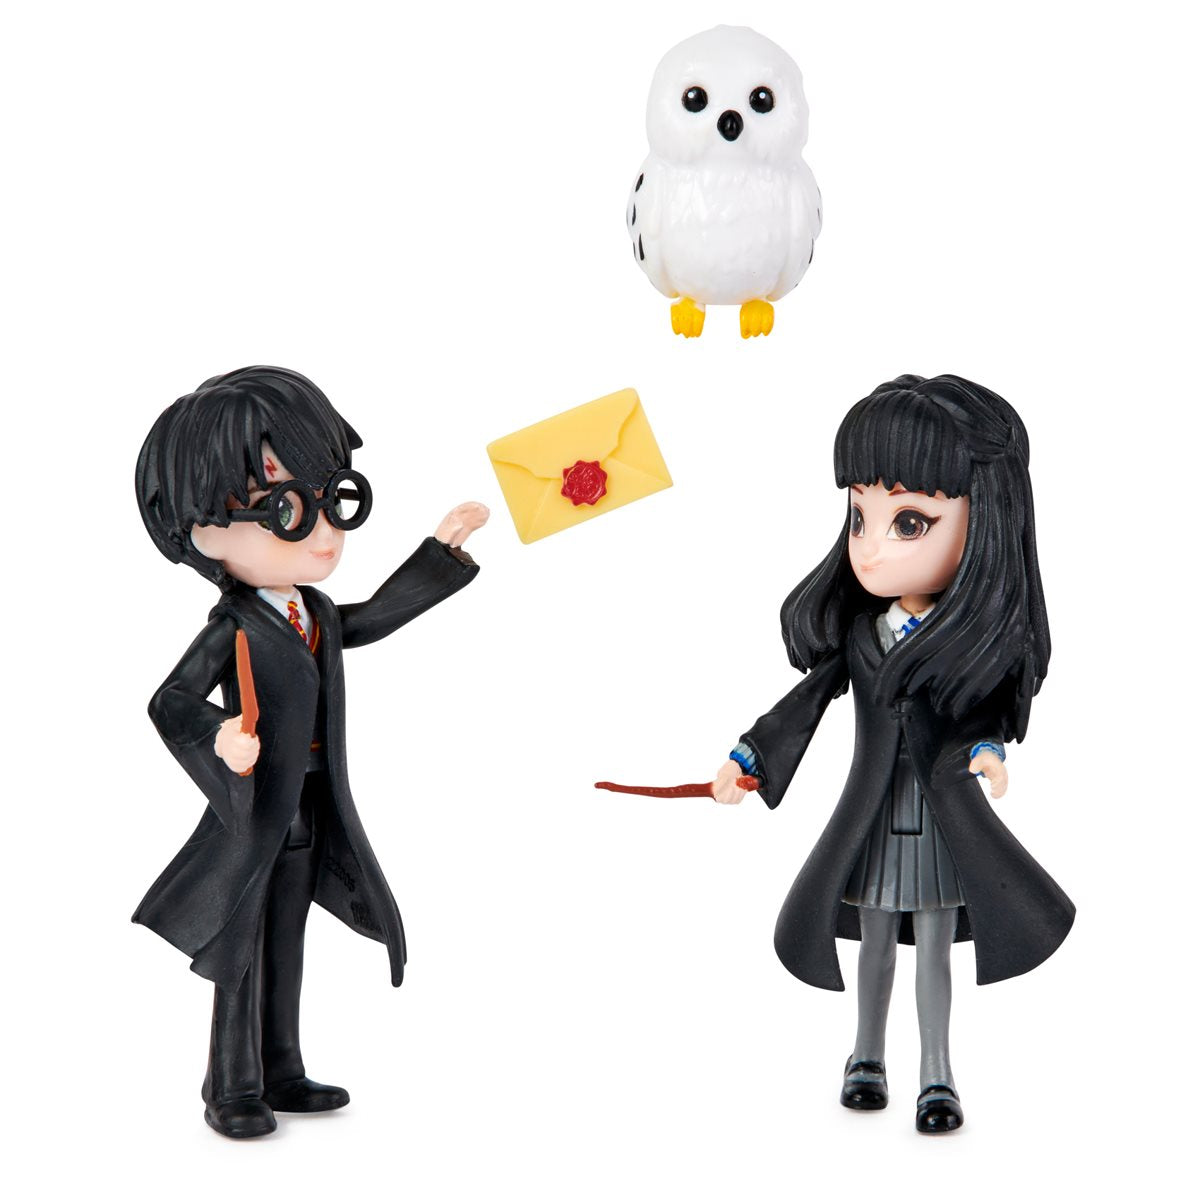 Wizarding World Harry Potter and Cho Chang Magical Minis Doll Friendship Set